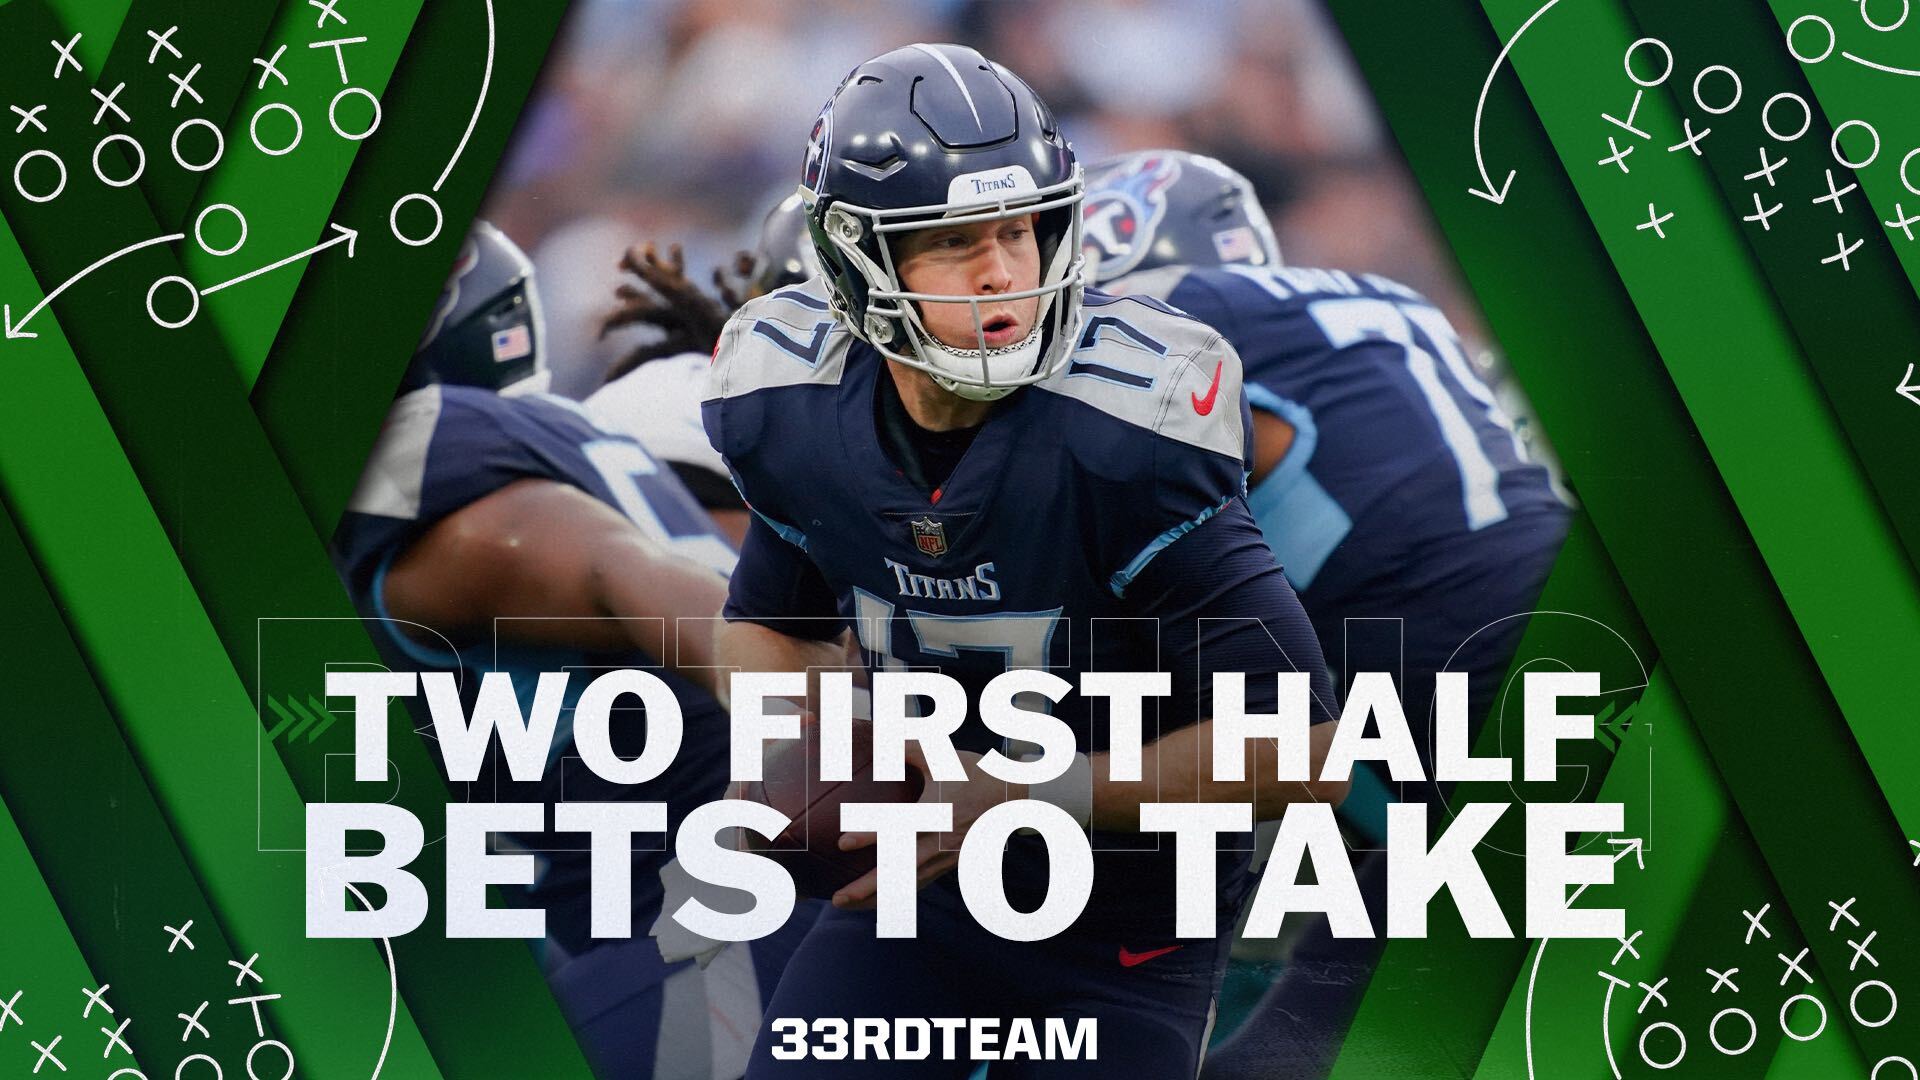 Eagles and Bears Matchup Highlighted as a First Half Bet to Take in Week 15